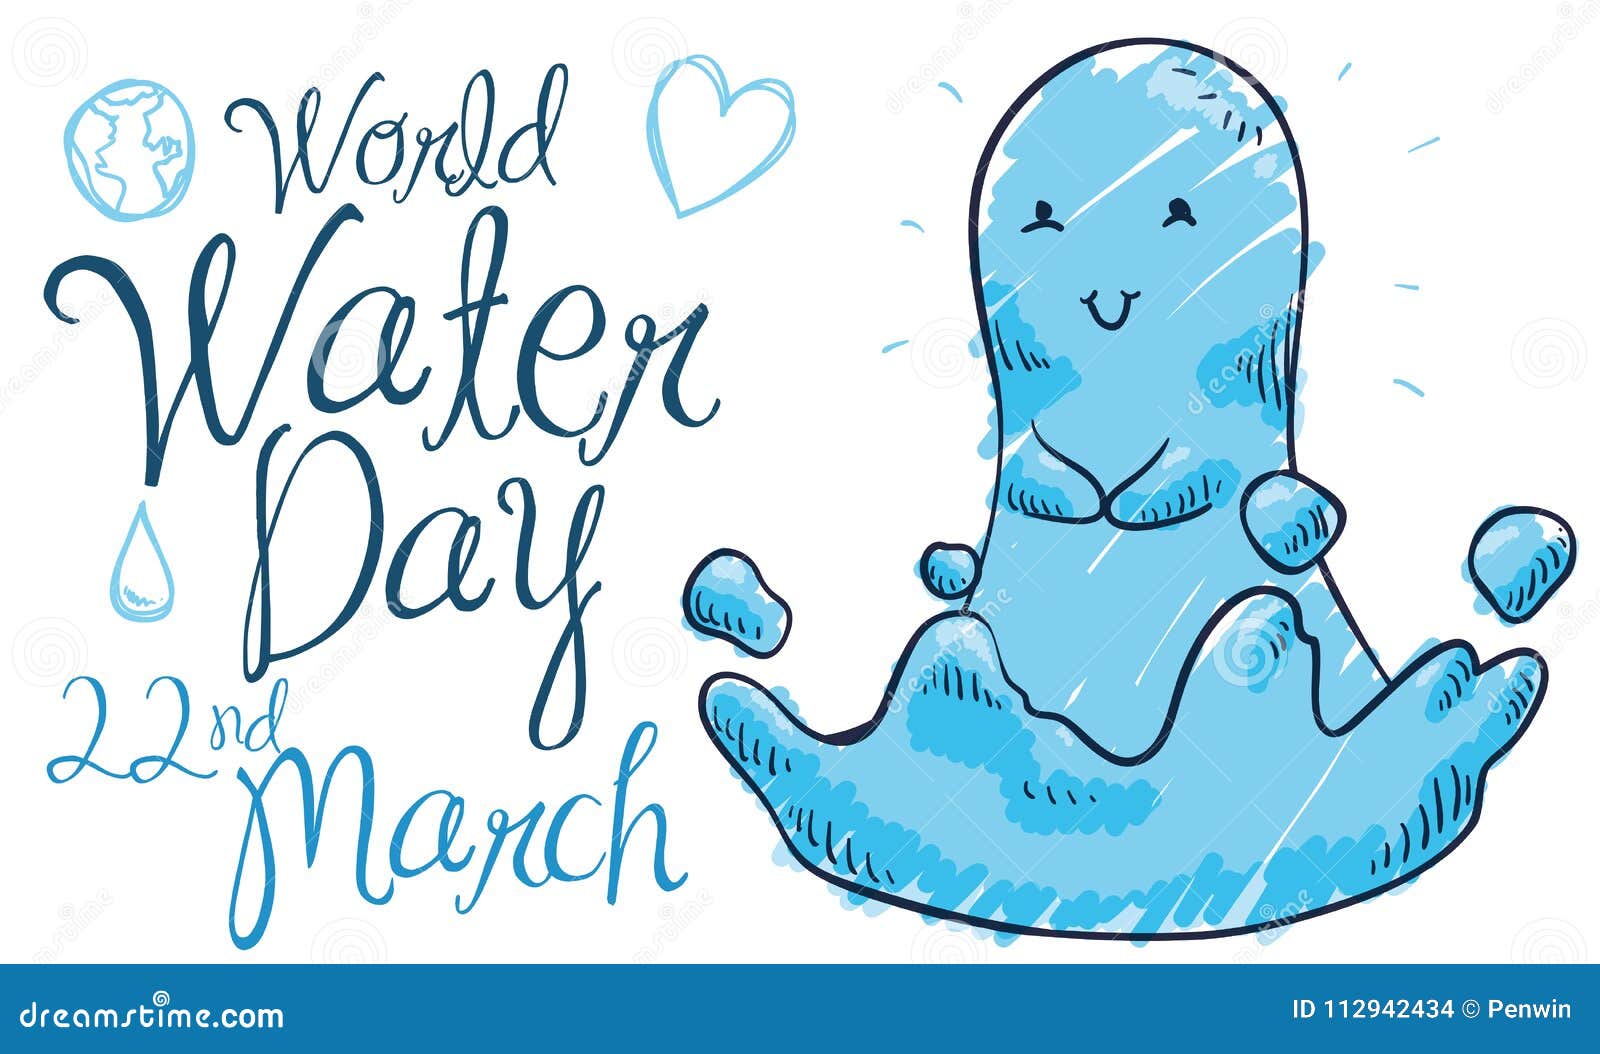 World Water Day: How Climate Change is Impacting Water Resources